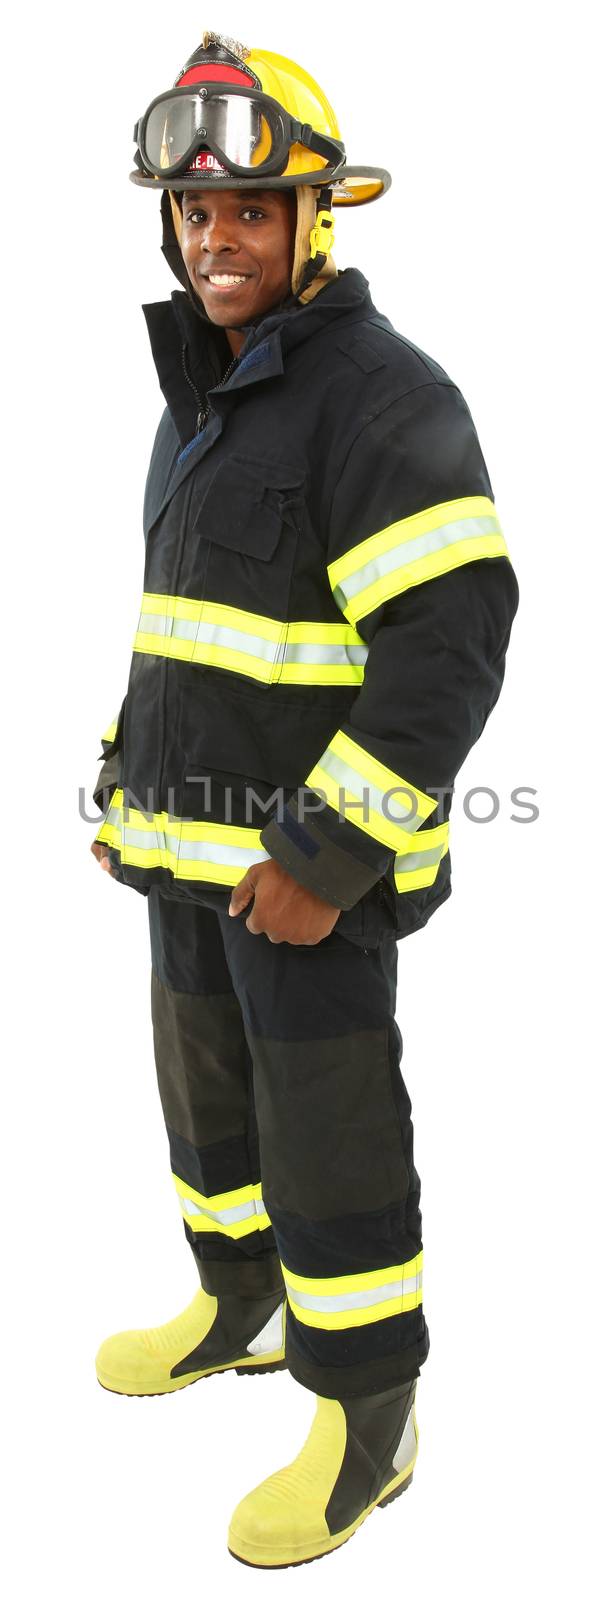 Attractive black middle aged man in fire fighter's uniform with clipping path.